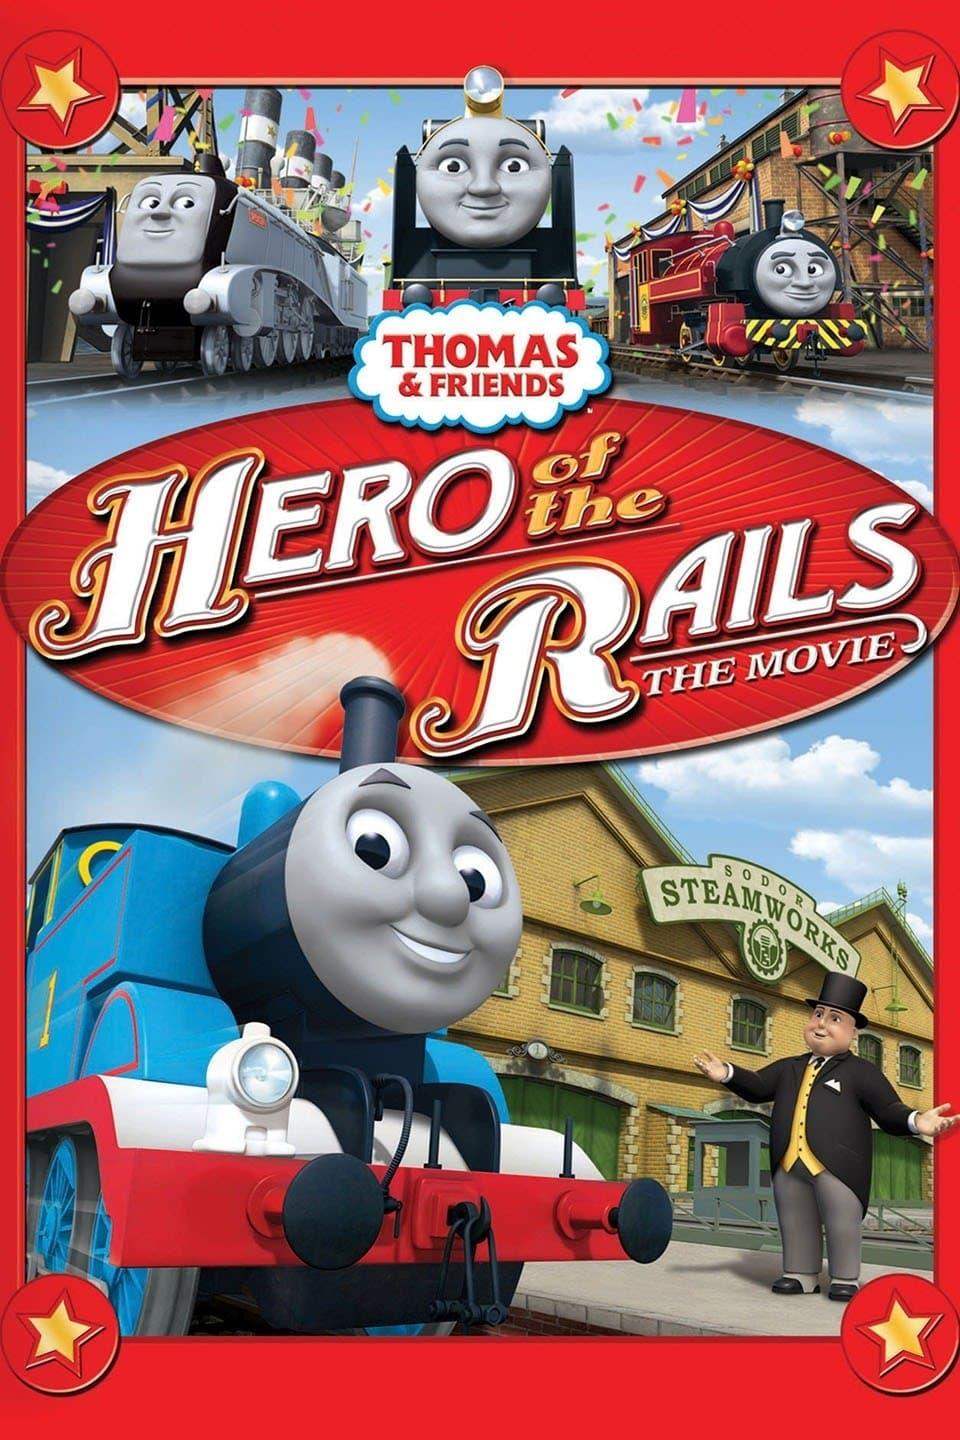 Thomas & Friends: Hero of the Rails - The Movie poster